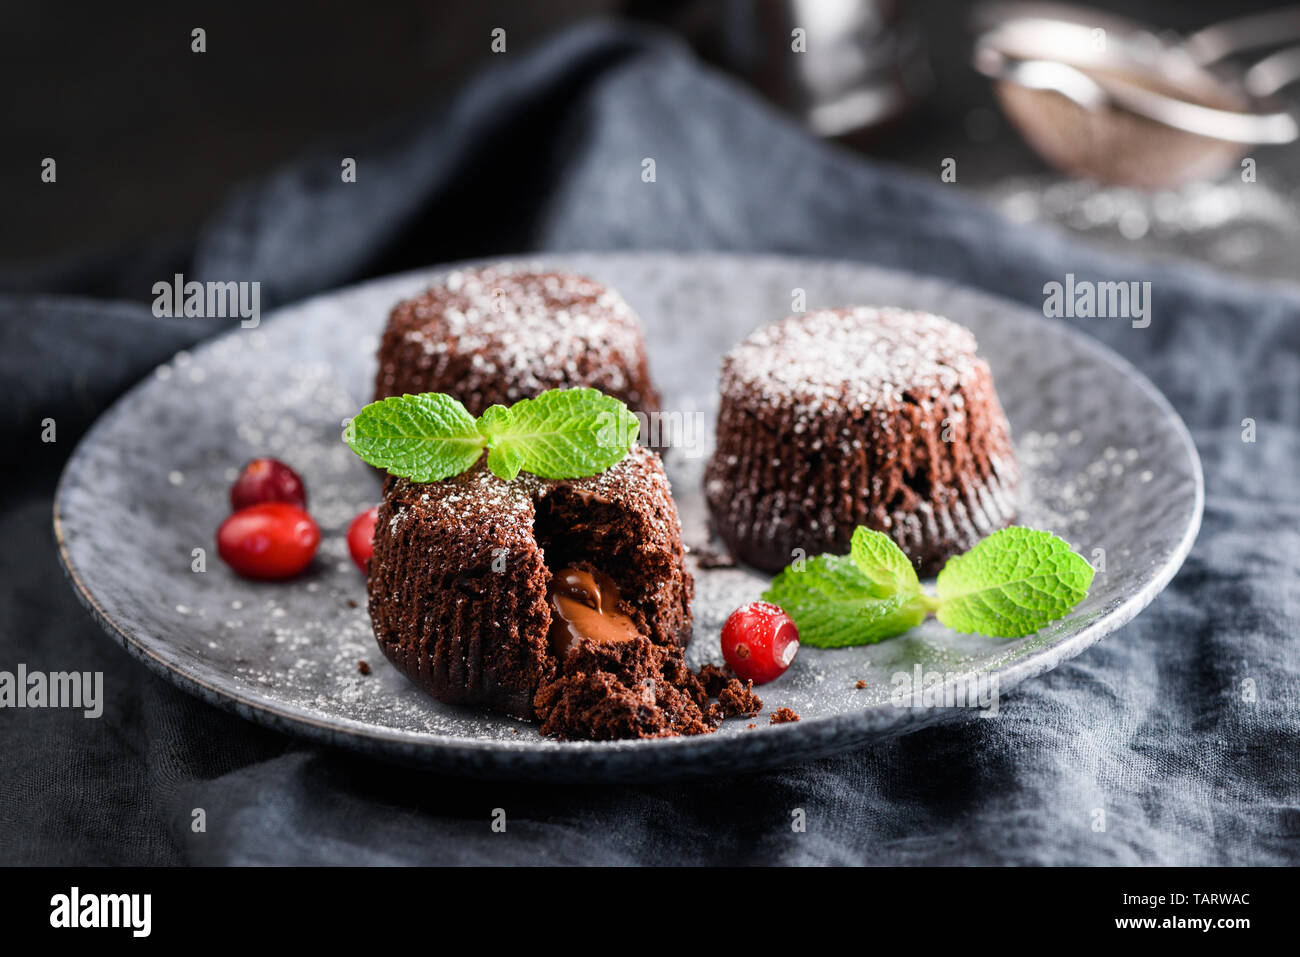 Lava chocolate cakes decorated with mint leaf and red berries on plate. Dark food photo. Tasty chocolate dessert Stock Photo